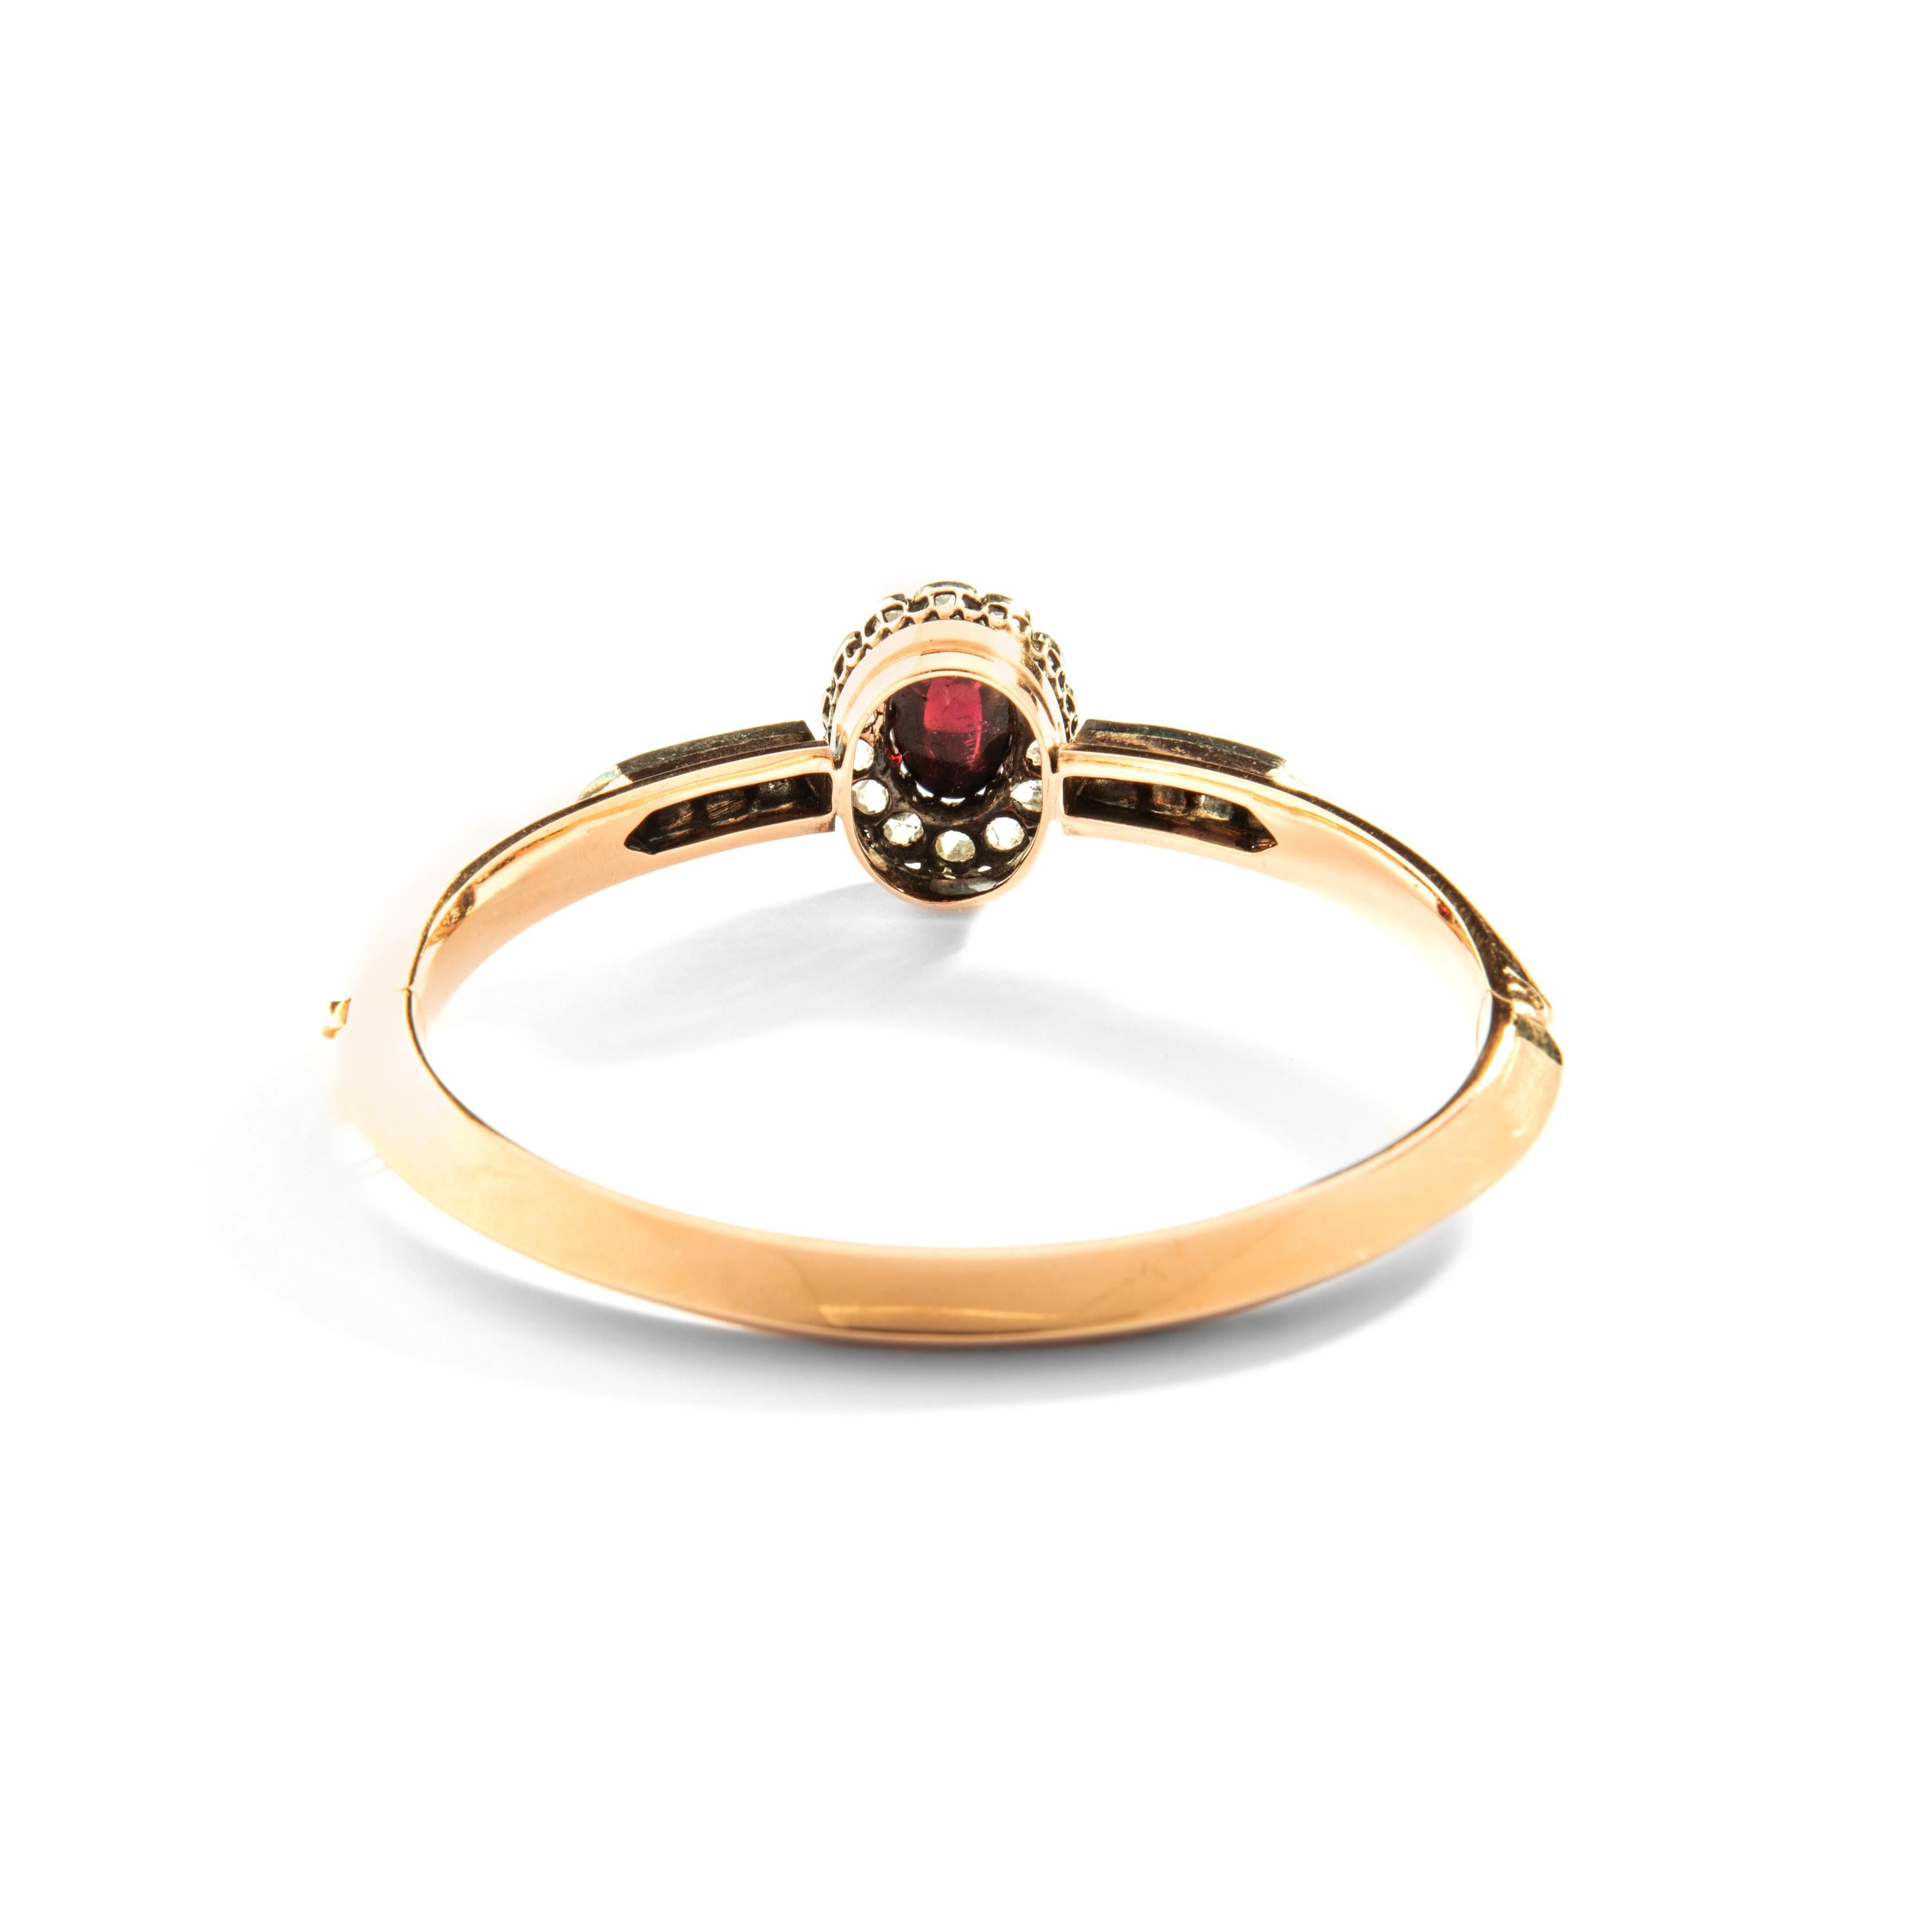 Cabochon Garnet surrounded by Rose cut Diamond centering an 18k gold and silver Bangle. 
Dimension: 2.36 x 2.16 inches. 
French assay marks. 
Late 19th Century.